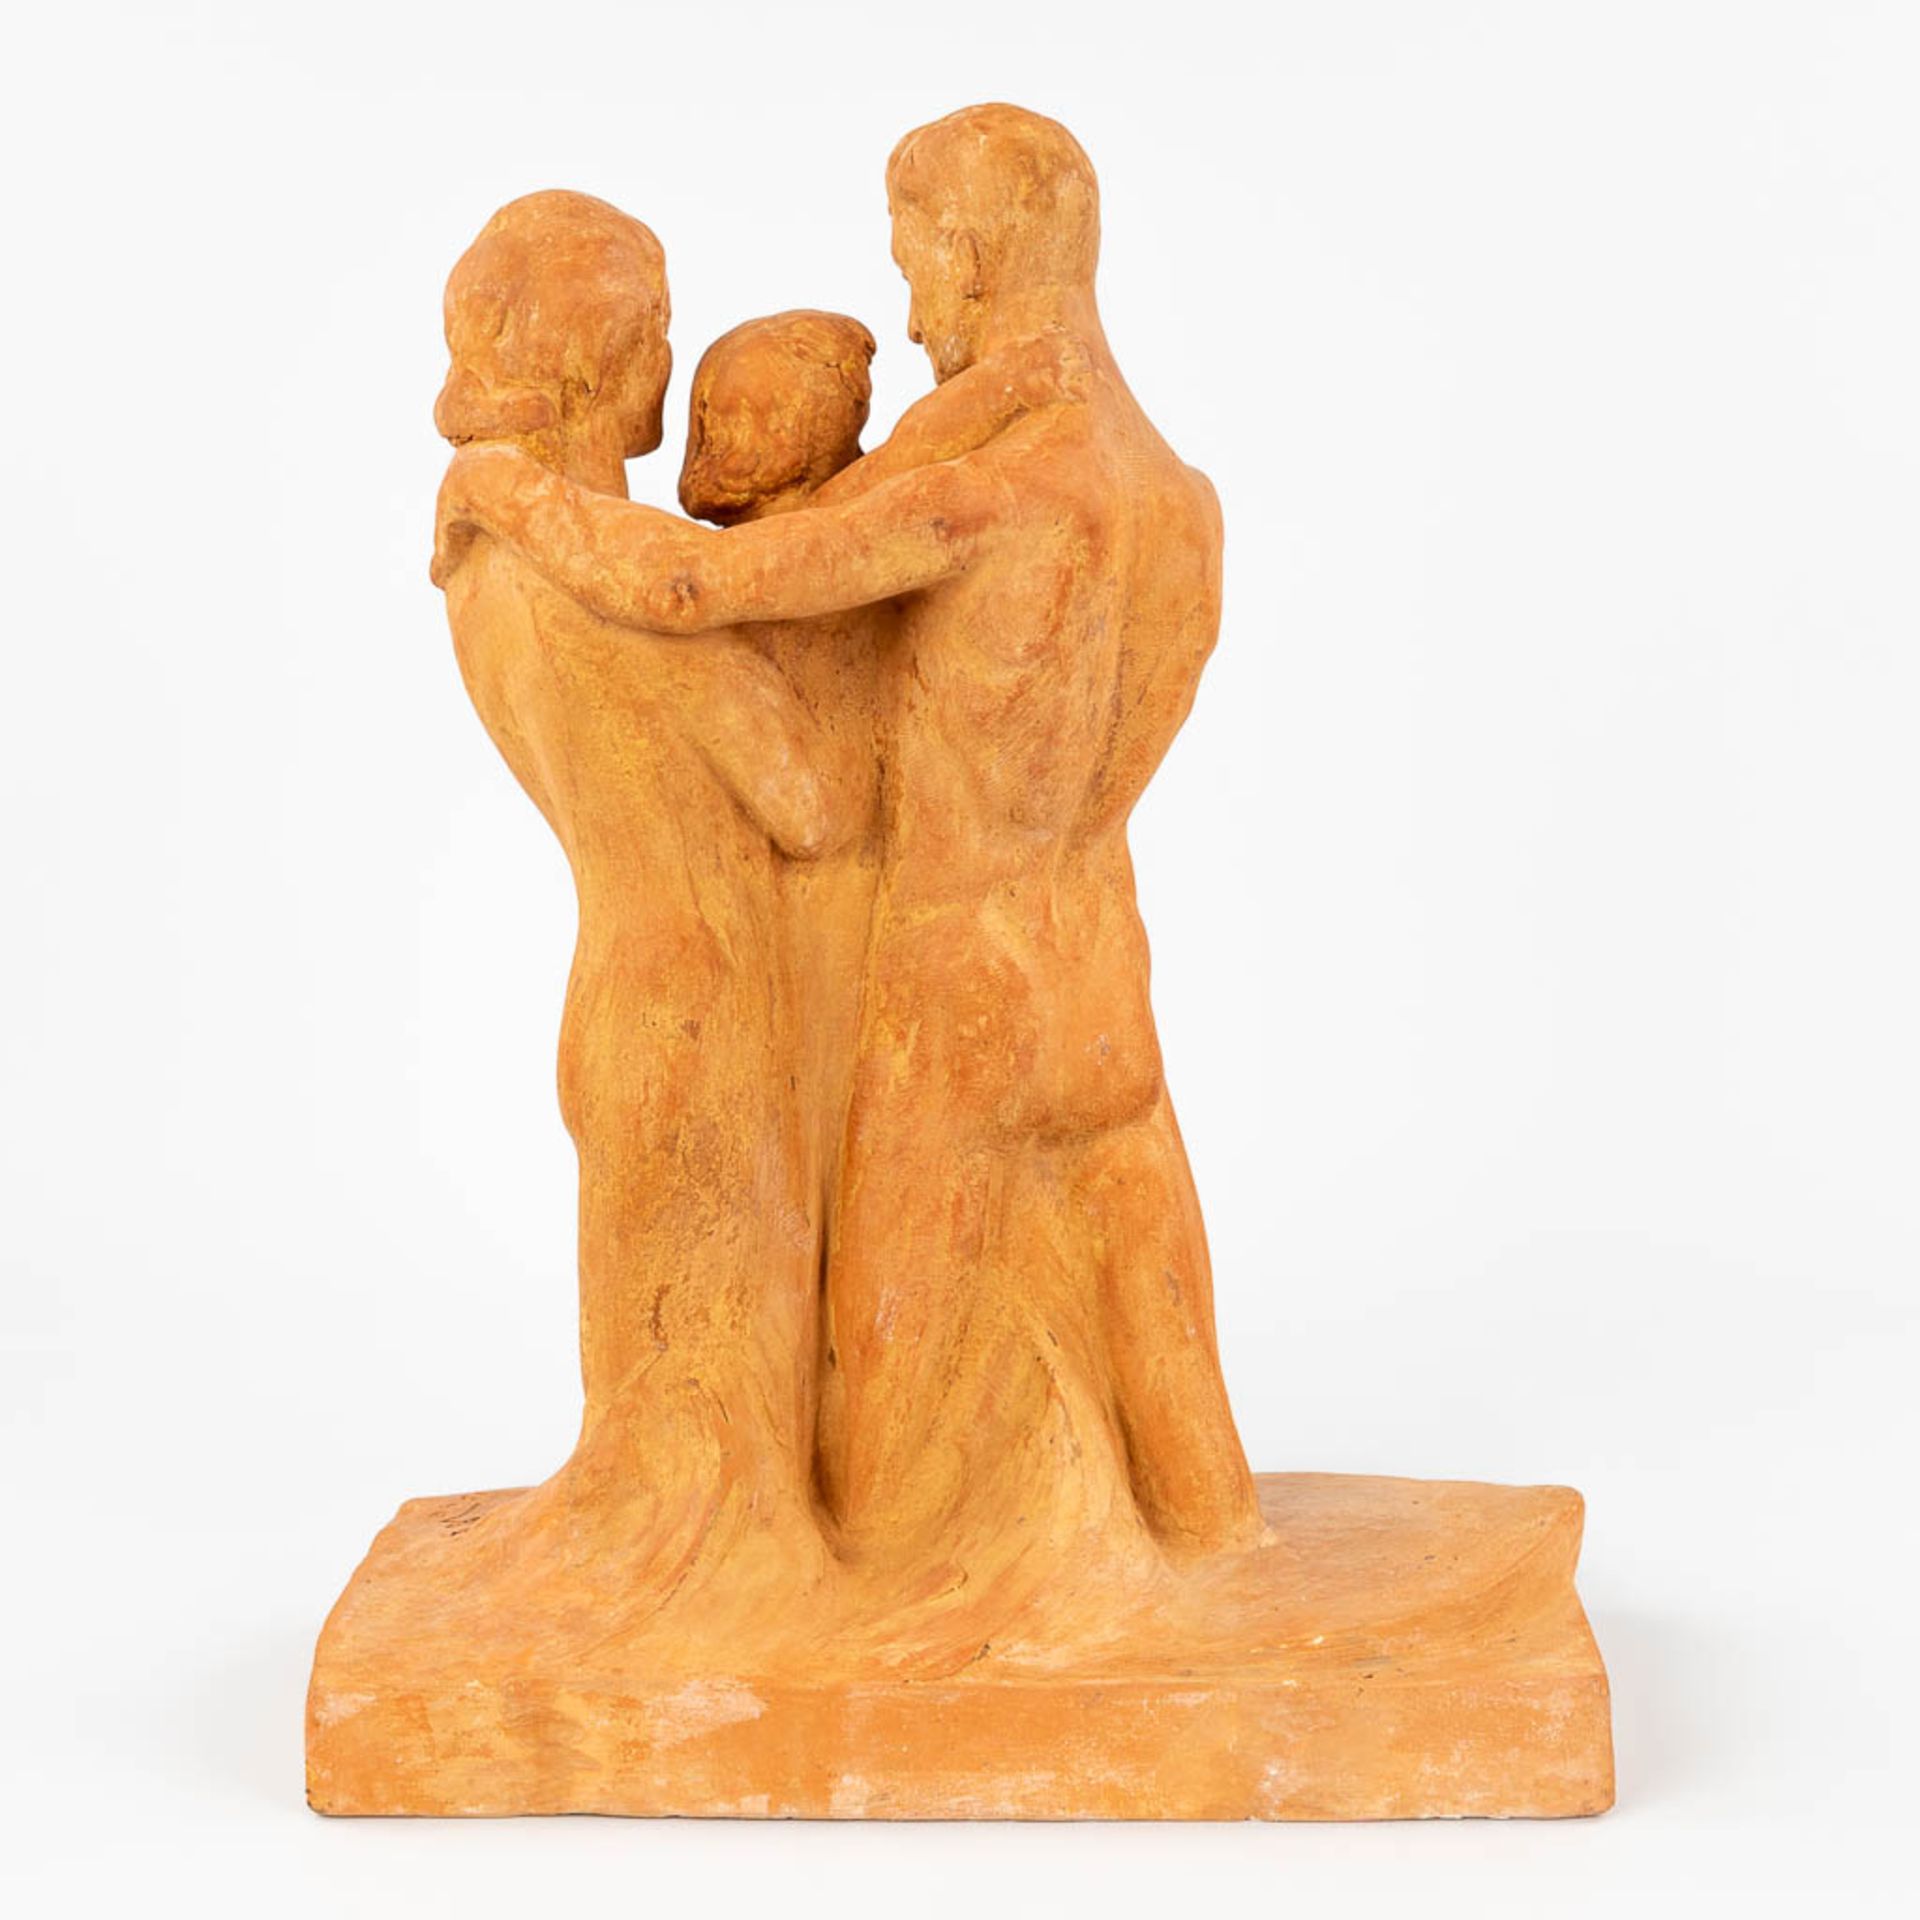 Achille LEYS (1873-1953) 'Family' a statue made of terracotta.Ê1946. (16 x 34 x 44cm) - Image 10 of 11